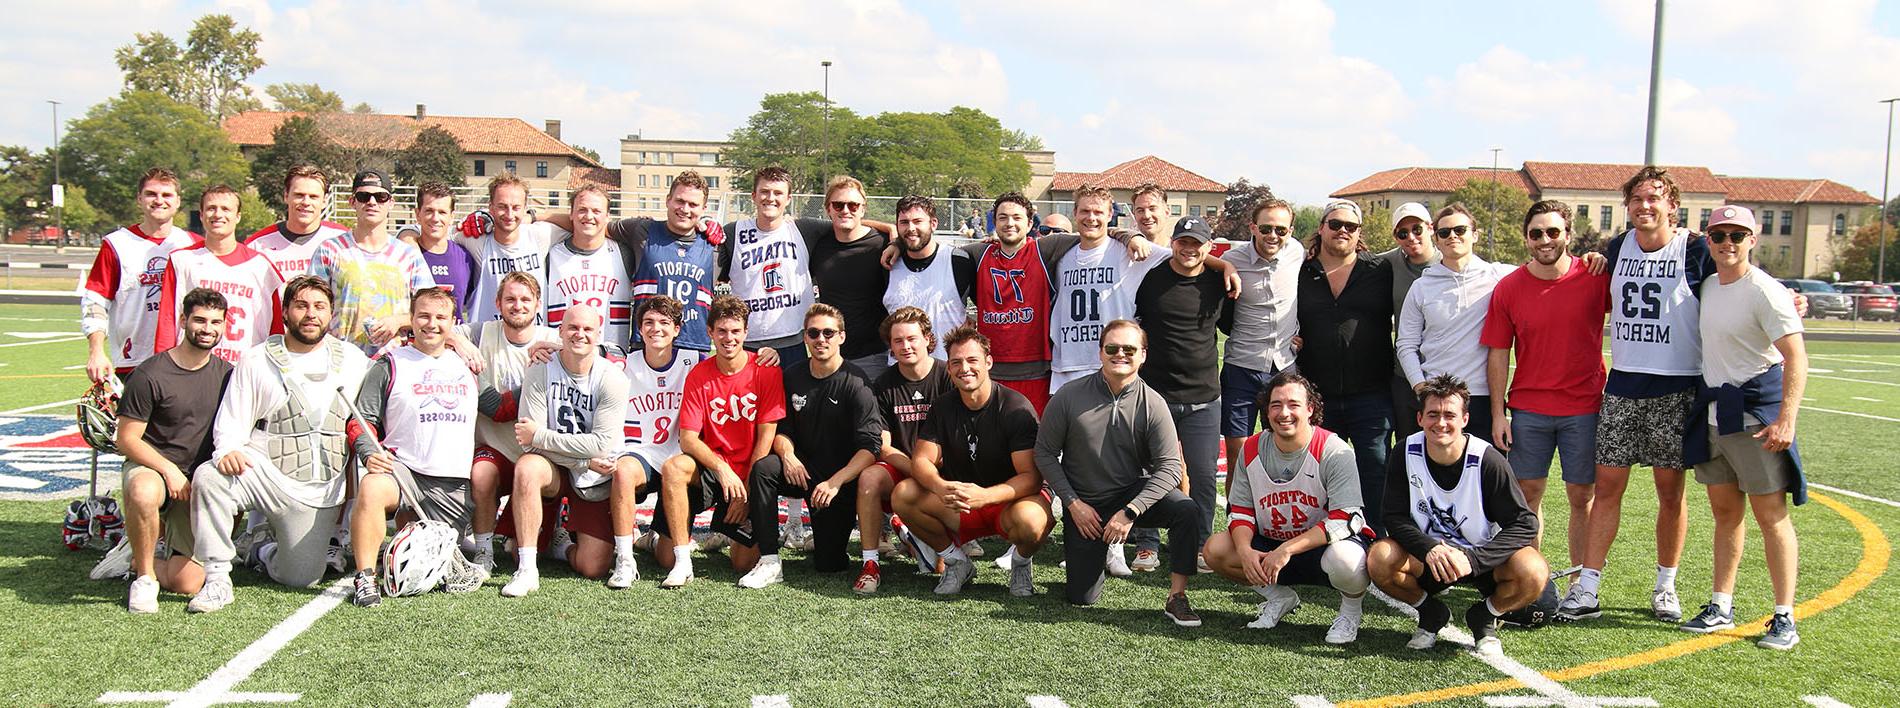 Detroit Mercy men's lacrosse student-athletes and alumni pose for a team photo on Titan Field after the alumni game.